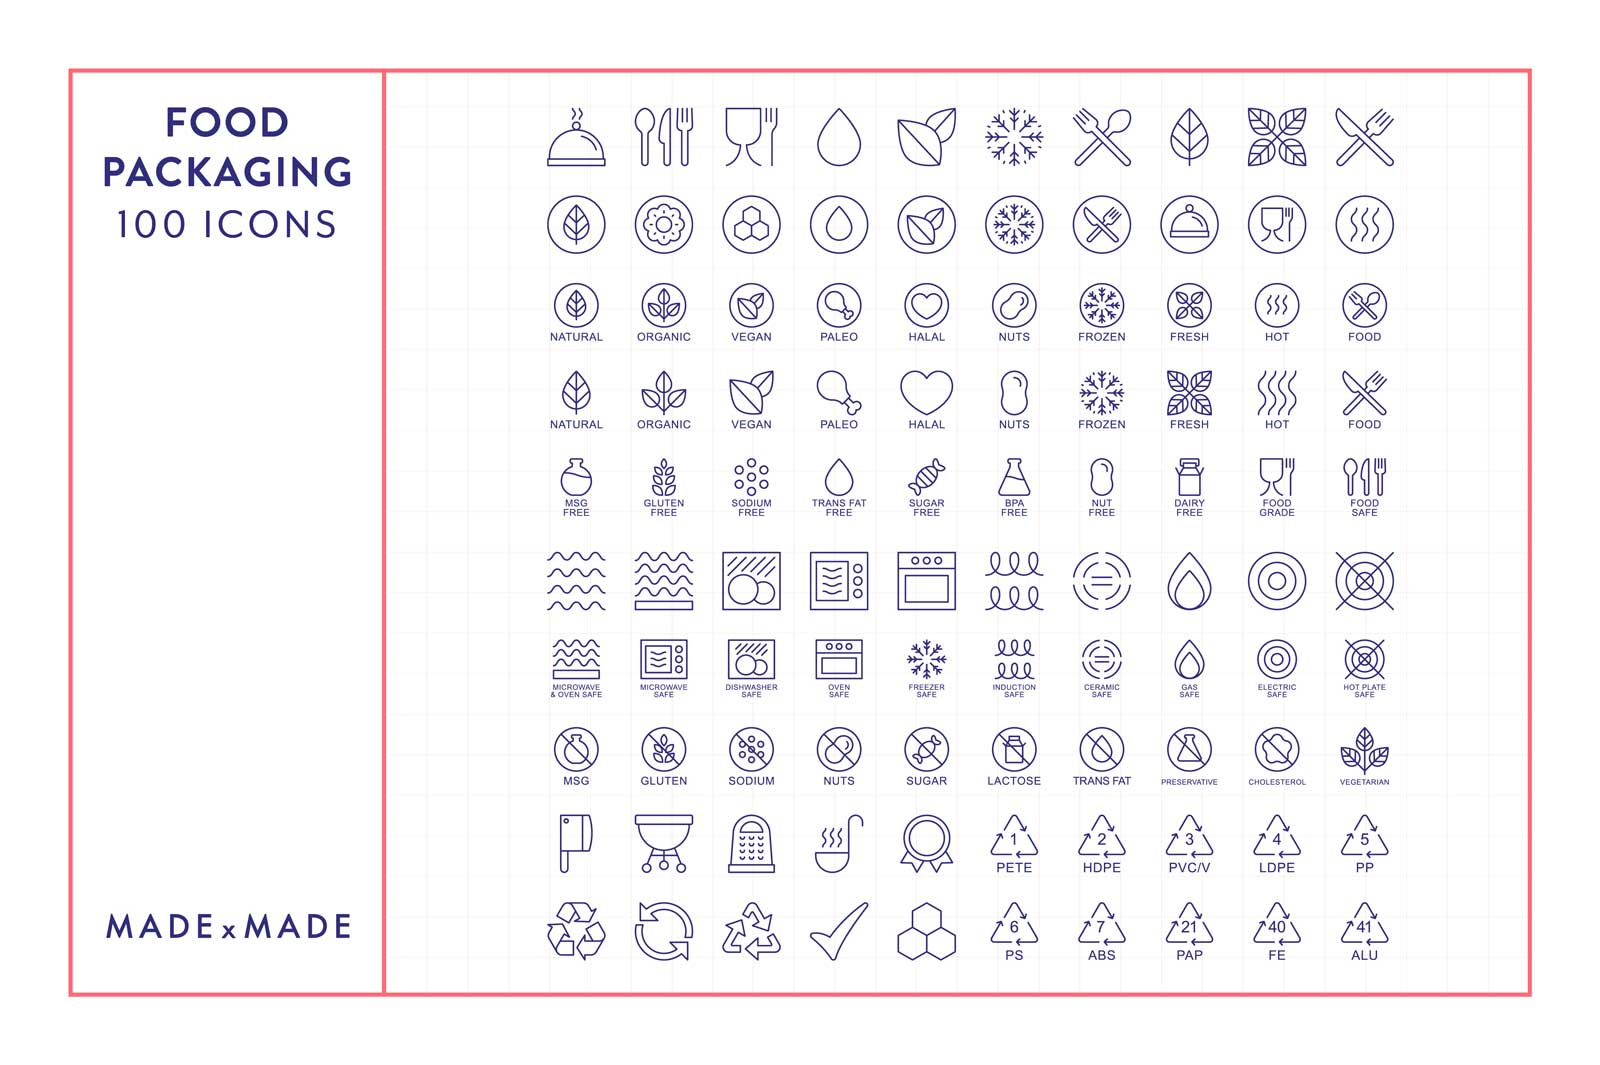 made x made icons food packaging – overview – downloadable icons and symbols for food, ingredients, food grade, cooking instructions, food safety, allergens, diets, natural, organic, recycling, free from, mandatories